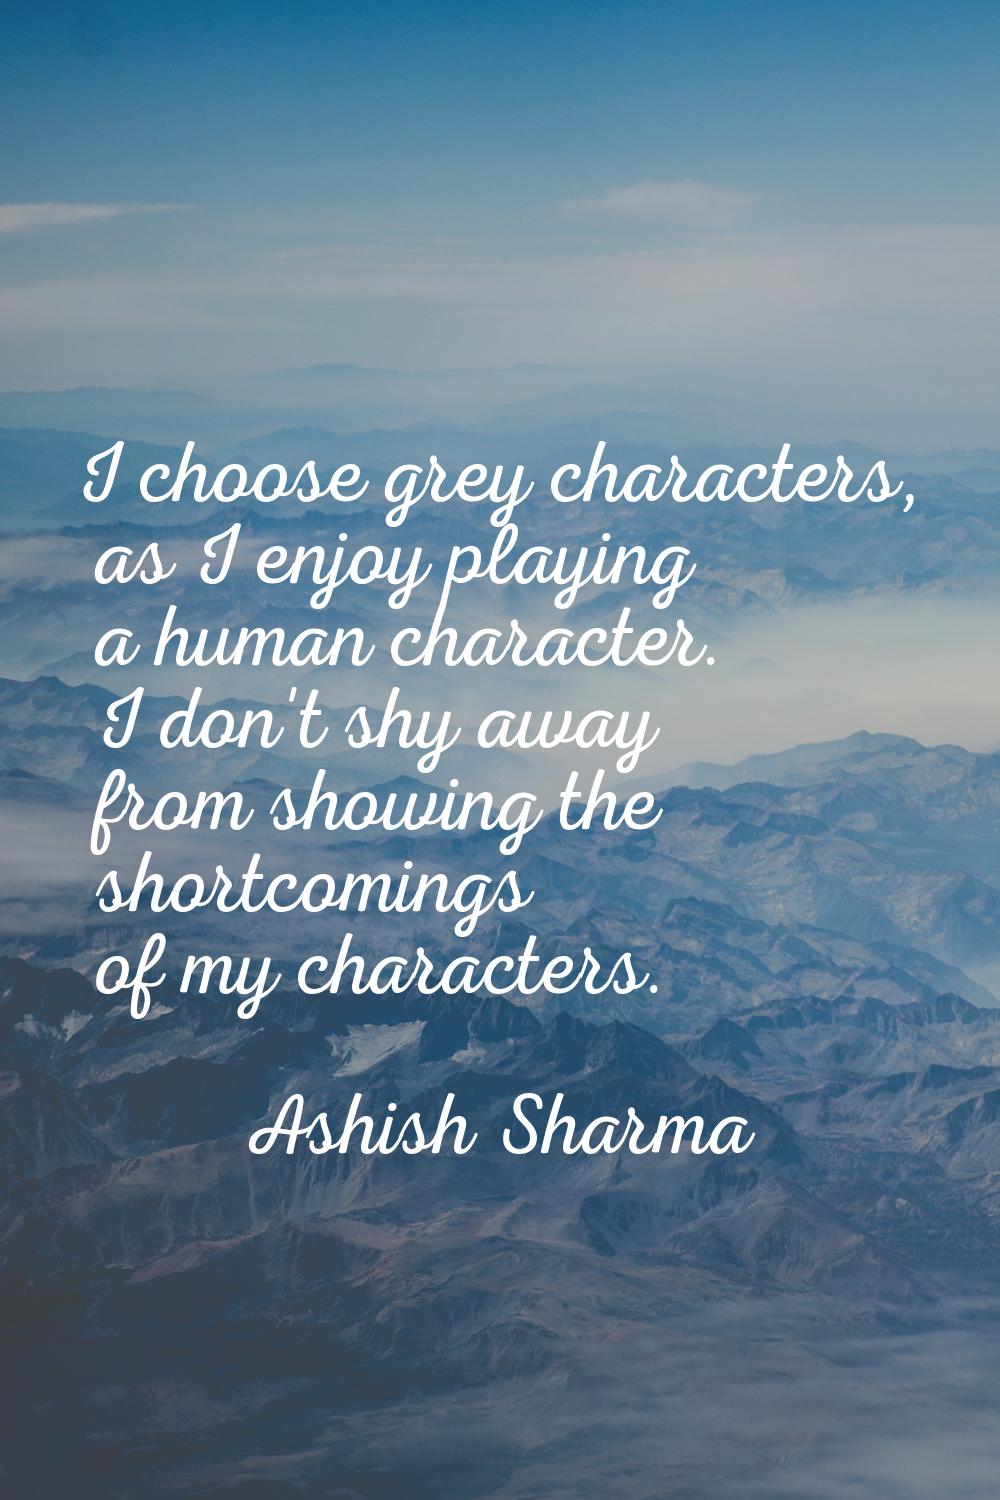 I choose grey characters, as I enjoy playing a human character. I don't shy away from showing the s